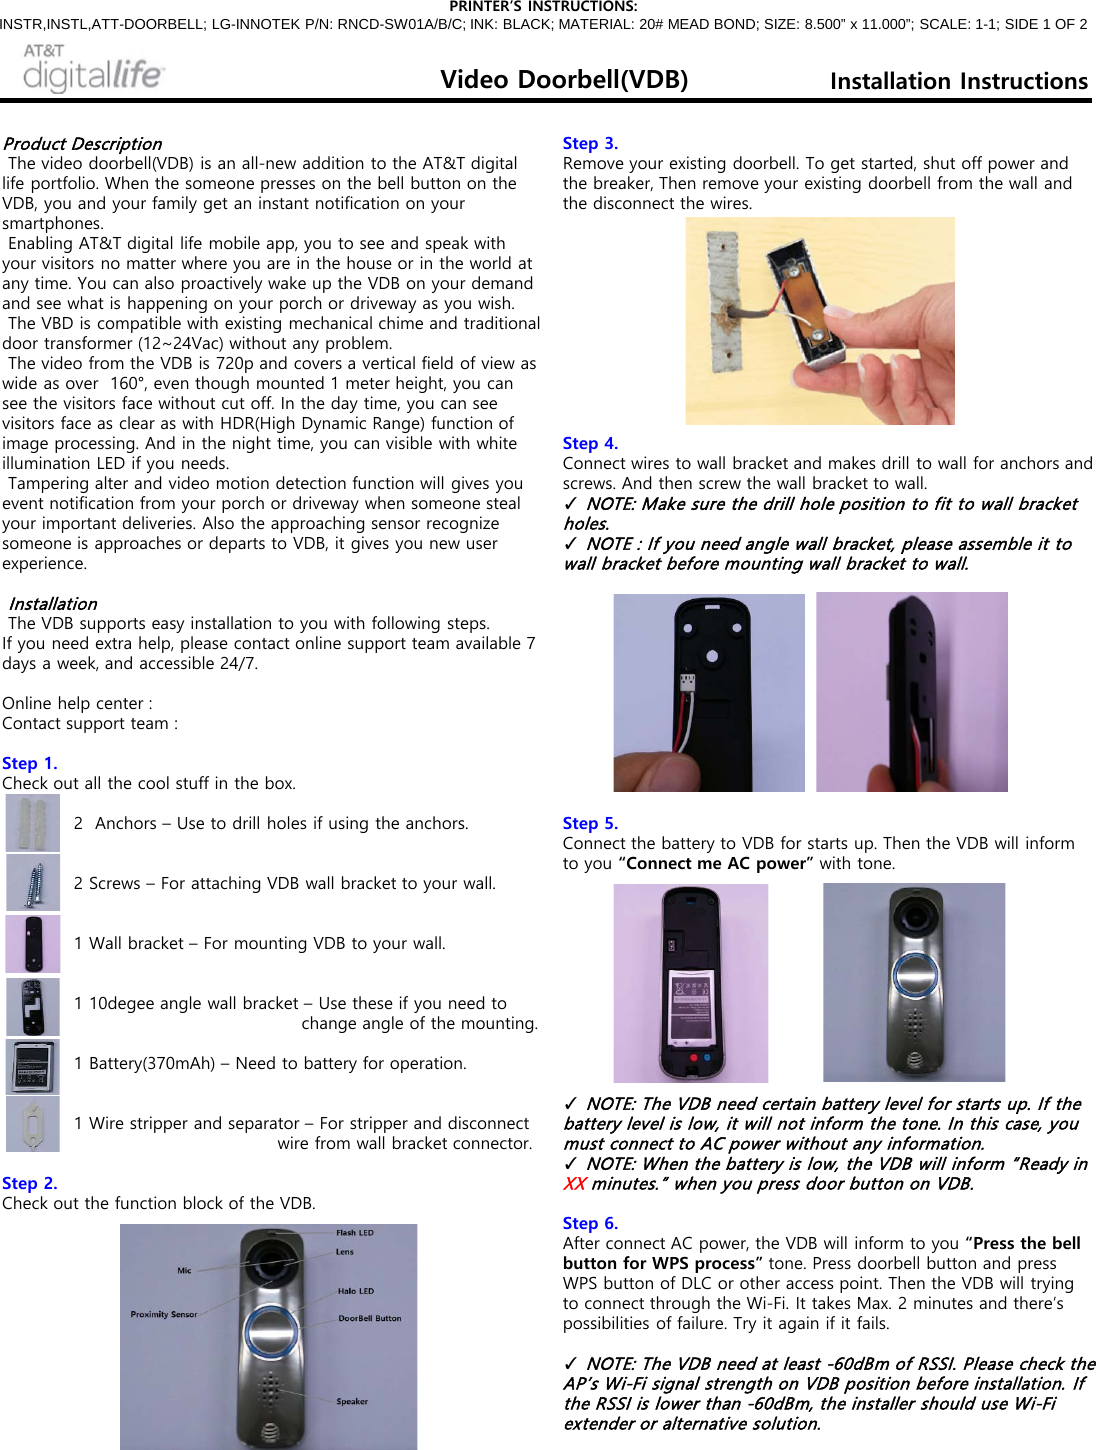 Product Description   The video doorbell(VDB) is an all-new addition to the AT&amp;T digital life portfolio. When the someone presses on the bell button on the VDB, you and your family get an instant notification on your smartphones.   Enabling AT&amp;T digital life mobile app, you to see and speak with your visitors no matter where you are in the house or in the world at any time. You can also proactively wake up the VDB on your demand and see what is happening on your porch or driveway as you wish.   The VBD is compatible with existing mechanical chime and traditional door transformer (12~24Vac) without any problem.   The video from the VDB is 720p and covers a vertical field of view as wide as over  160°, even though mounted 1 meter height, you can see the visitors face without cut off. In the day time, you can see visitors face as clear as with HDR(High Dynamic Range) function of image processing. And in the night time, you can visible with white illumination LED if you needs.   Tampering alter and video motion detection function will gives you event notification from your porch or driveway when someone steal your important deliveries. Also the approaching sensor recognize someone is approaches or departs to VDB, it gives you new user  experience.    Installation    The VDB supports easy installation to you with following steps.  If you need extra help, please contact online support team available 7 days a week, and accessible 24/7.   Online help center :  Contact support team :   Step 1.  Check out all the cool stuff in the box.                2  Anchors – Use to drill holes if using the anchors.                2 Screws – For attaching VDB wall bracket to your wall.                1 Wall bracket – For mounting VDB to your wall.                            1 10degee angle wall bracket – Use these if you need to                                                    change angle of the mounting.              1 Battery(370mAh) – Need to battery for operation.                1 Wire stripper and separator – For stripper and disconnect                                                wire from wall bracket connector.   Step 2.  Check out the function block of the VDB.                Step 3.  Remove your existing doorbell. To get started, shut off power and the breaker, Then remove your existing doorbell from the wall and the disconnect the wires.             Step 4.  Connect wires to wall bracket and makes drill to wall for anchors and screws. And then screw the wall bracket to wall.  ✓ NOTE: Make sure the drill hole position to fit to wall bracket holes.  ✓ NOTE : If you need angle wall bracket, please assemble it to wall bracket before mounting wall bracket to wall.              Step 5.  Connect the battery to VDB for starts up. Then the VDB will inform to you “Connect me AC power” with tone.              ✓ NOTE: The VDB need certain battery level for starts up. If the battery level is low, it will not inform the tone. In this case, you must connect to AC power without any information.  ✓ NOTE: When the battery is low, the VDB will inform “Ready in XX minutes.” when you press door button on VDB.   Step 6.  After connect AC power, the VDB will inform to you “Press the bell button for WPS process” tone. Press doorbell button and press WPS button of DLC or other access point. Then the VDB will trying to connect through the Wi-Fi. It takes Max. 2 minutes and there’s possibilities of failure. Try it again if it fails.      ✓ NOTE: The VDB need at least -60dBm of RSSI. Please check the AP’s Wi-Fi signal strength on VDB position before installation. If the RSSI is lower than -60dBm, the installer should use Wi-Fi extender or alternative solution.  PRINTER’S INSTRUCTIONS: INSTR,INSTL,ATT-DOORBELL; LG-INNOTEK P/N: RNCD-SW01A/B/C; INK: BLACK; MATERIAL: 20# MEAD BOND; SIZE: 8.500” x 11.000”; SCALE: 1-1; SIDE 1 OF 2 Video Doorbell(VDB) Installation Instructions 